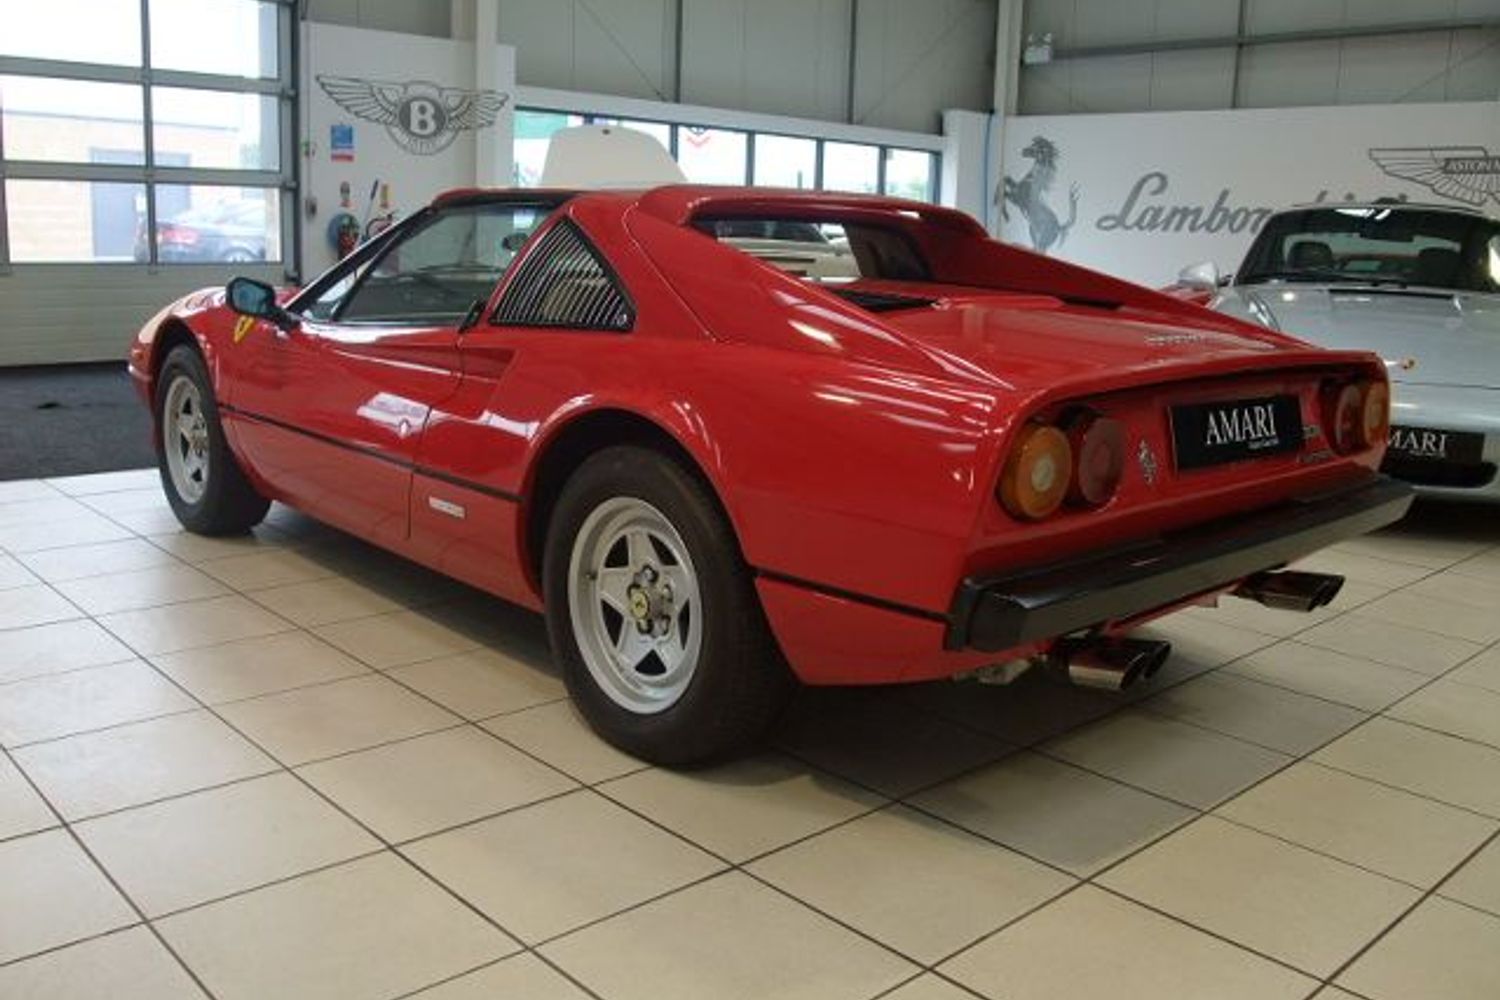 FERRARI 308 GTS QV "Classic Investment" Choice of two 308�s